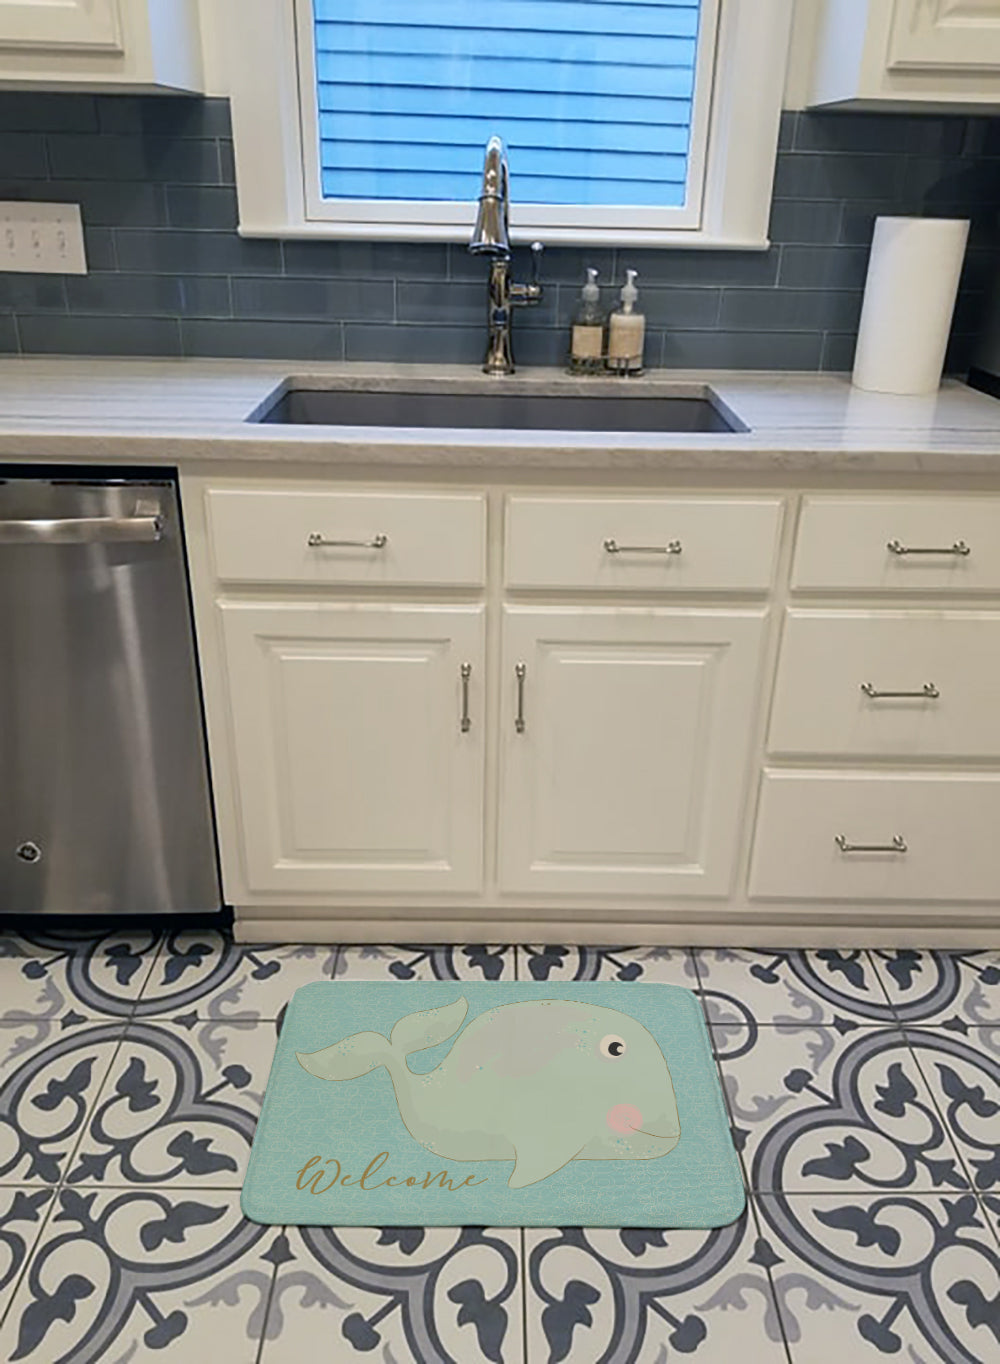 Whale Welcome Machine Washable Memory Foam Mat BB8533RUG - the-store.com